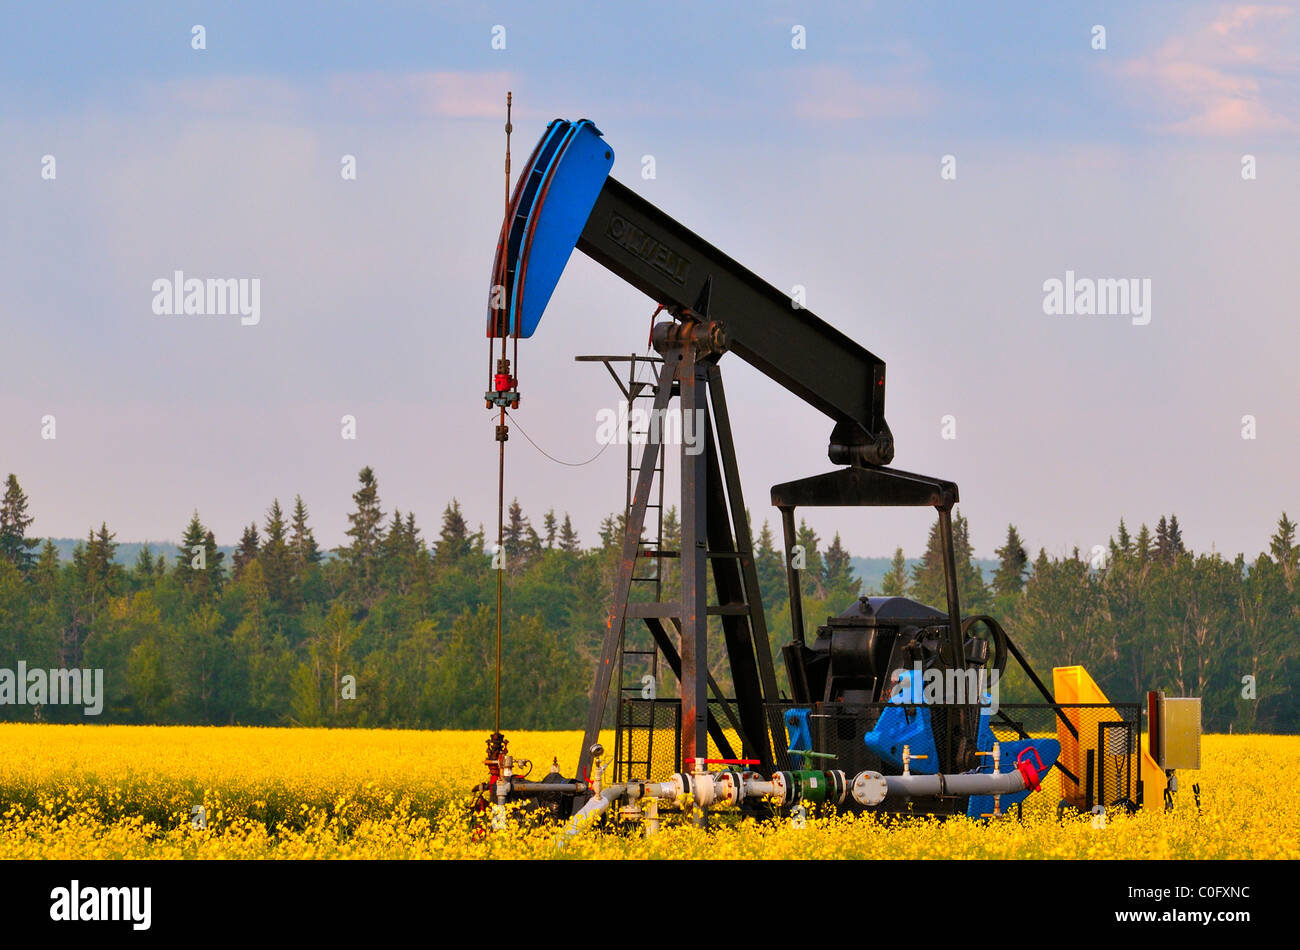 A pump jack pumping crude oil from under the ground Stock Photo